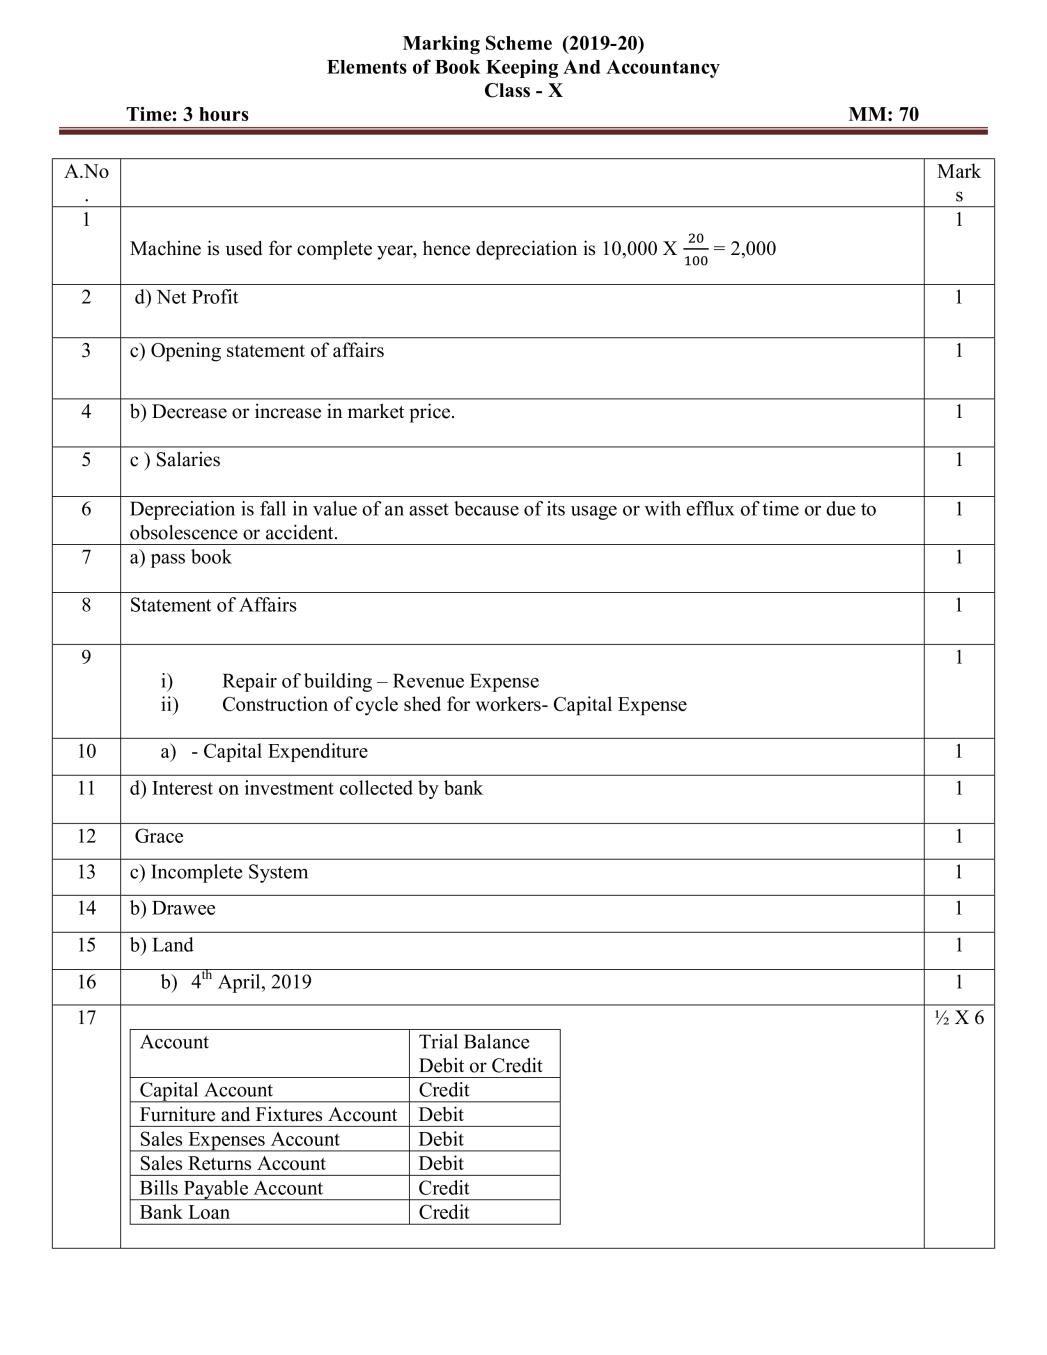 CBSE Class 10 Marking Scheme 2020 for Elements of Book Keeping and Accountancy - Page 1